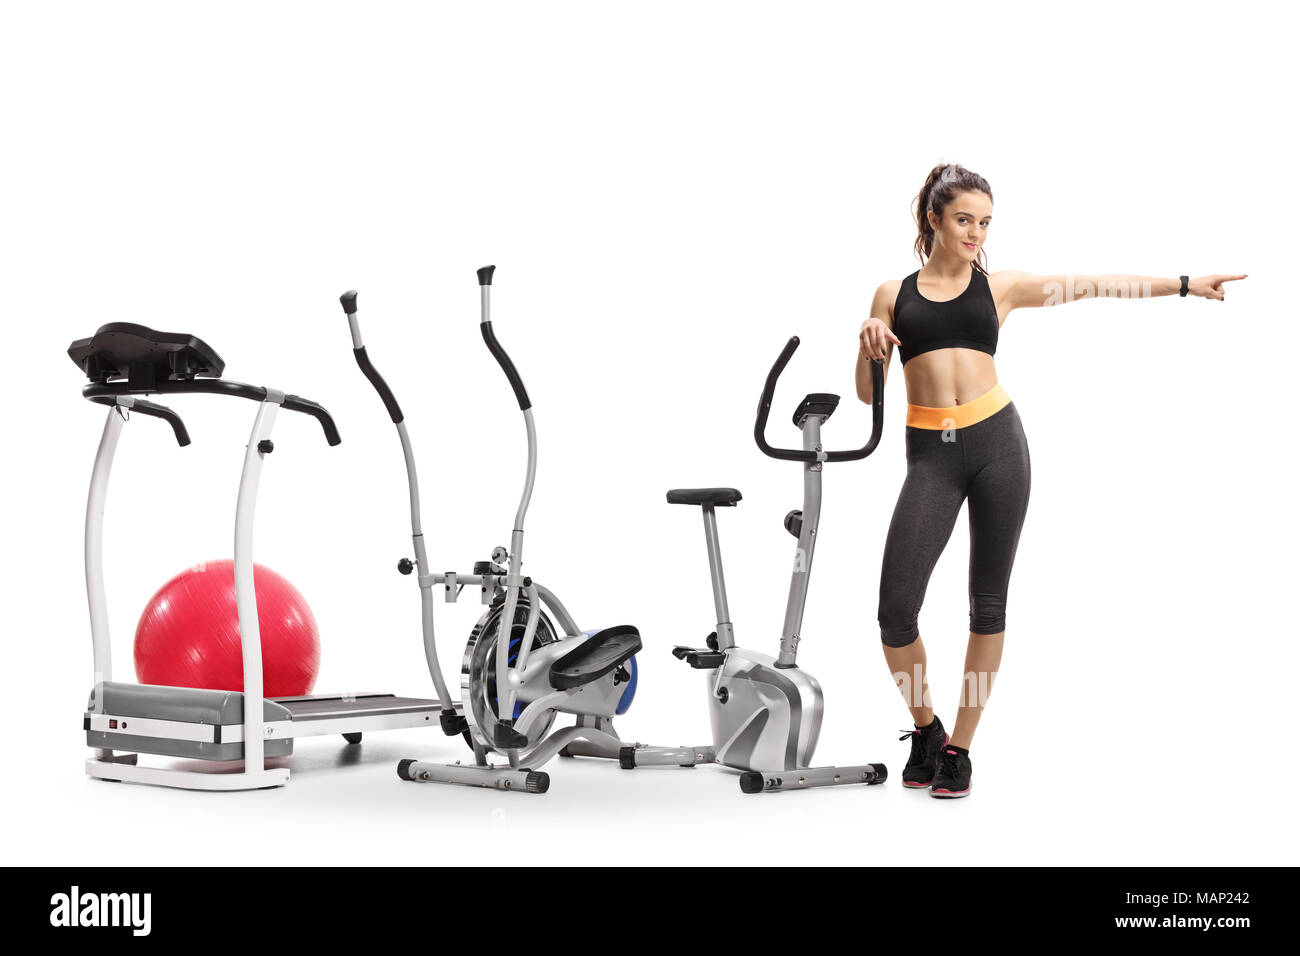 full-length-portrait-of-a-fitness-woman-with-exercise-machines-pointing